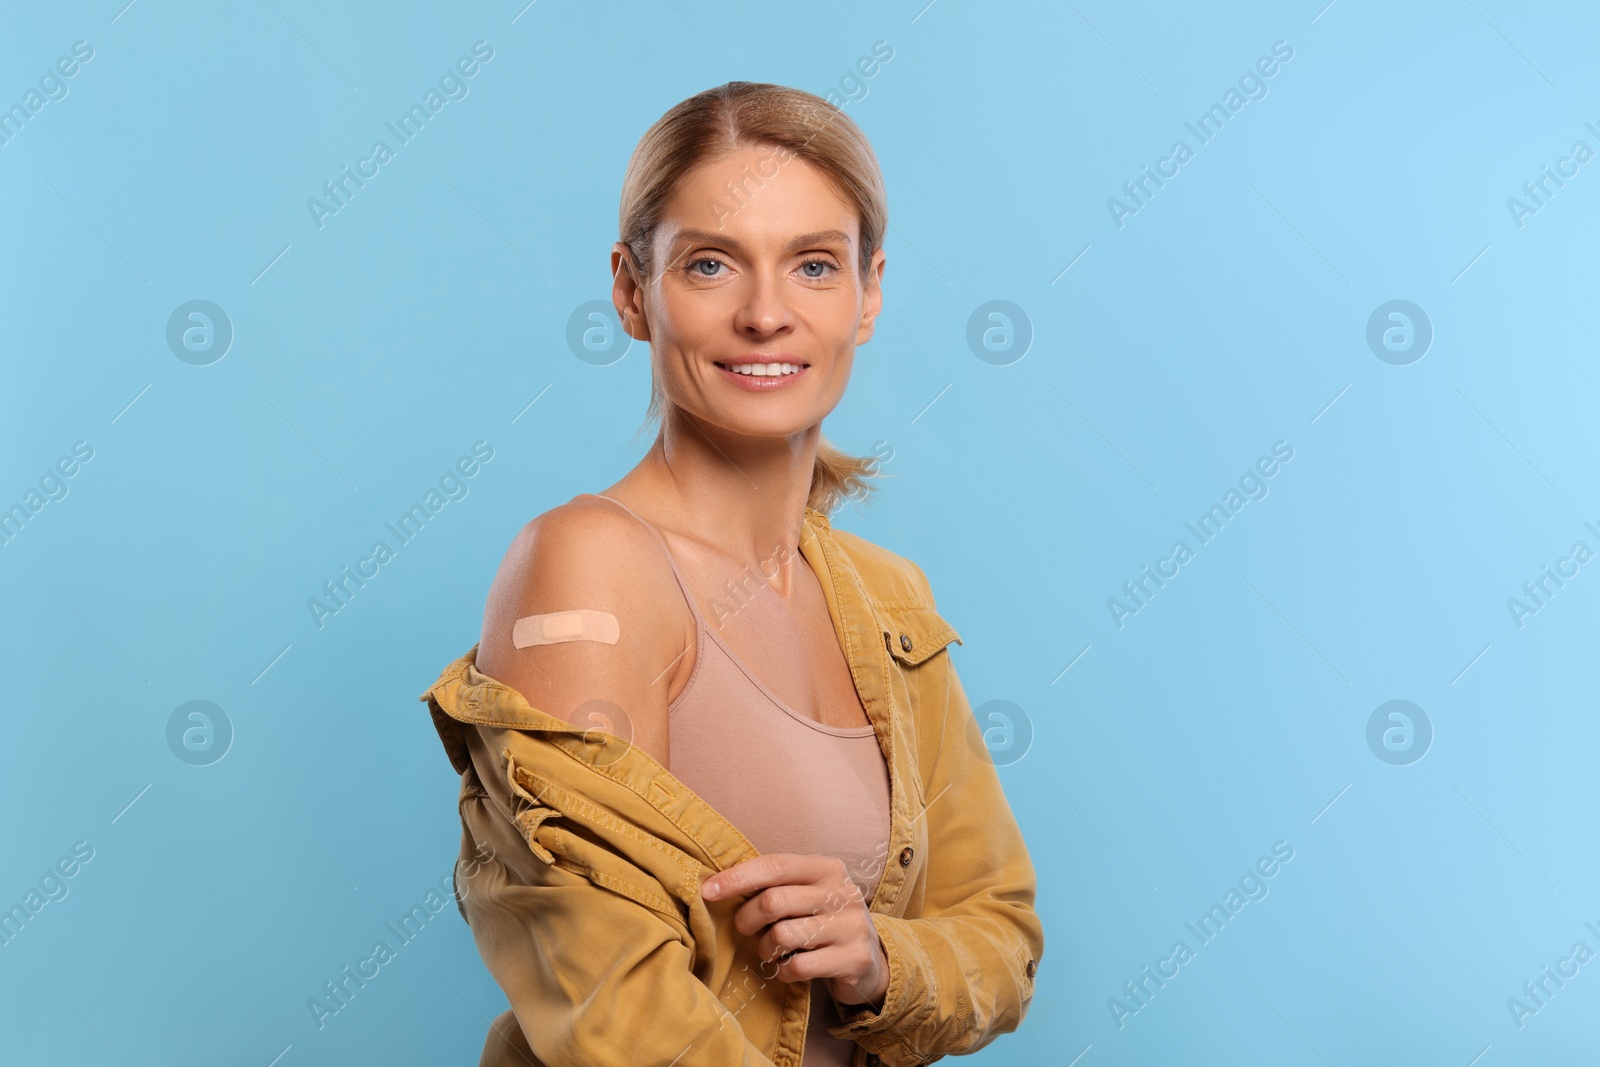 Photo of Smiling woman with adhesive bandage on arm after vaccination on light blue background